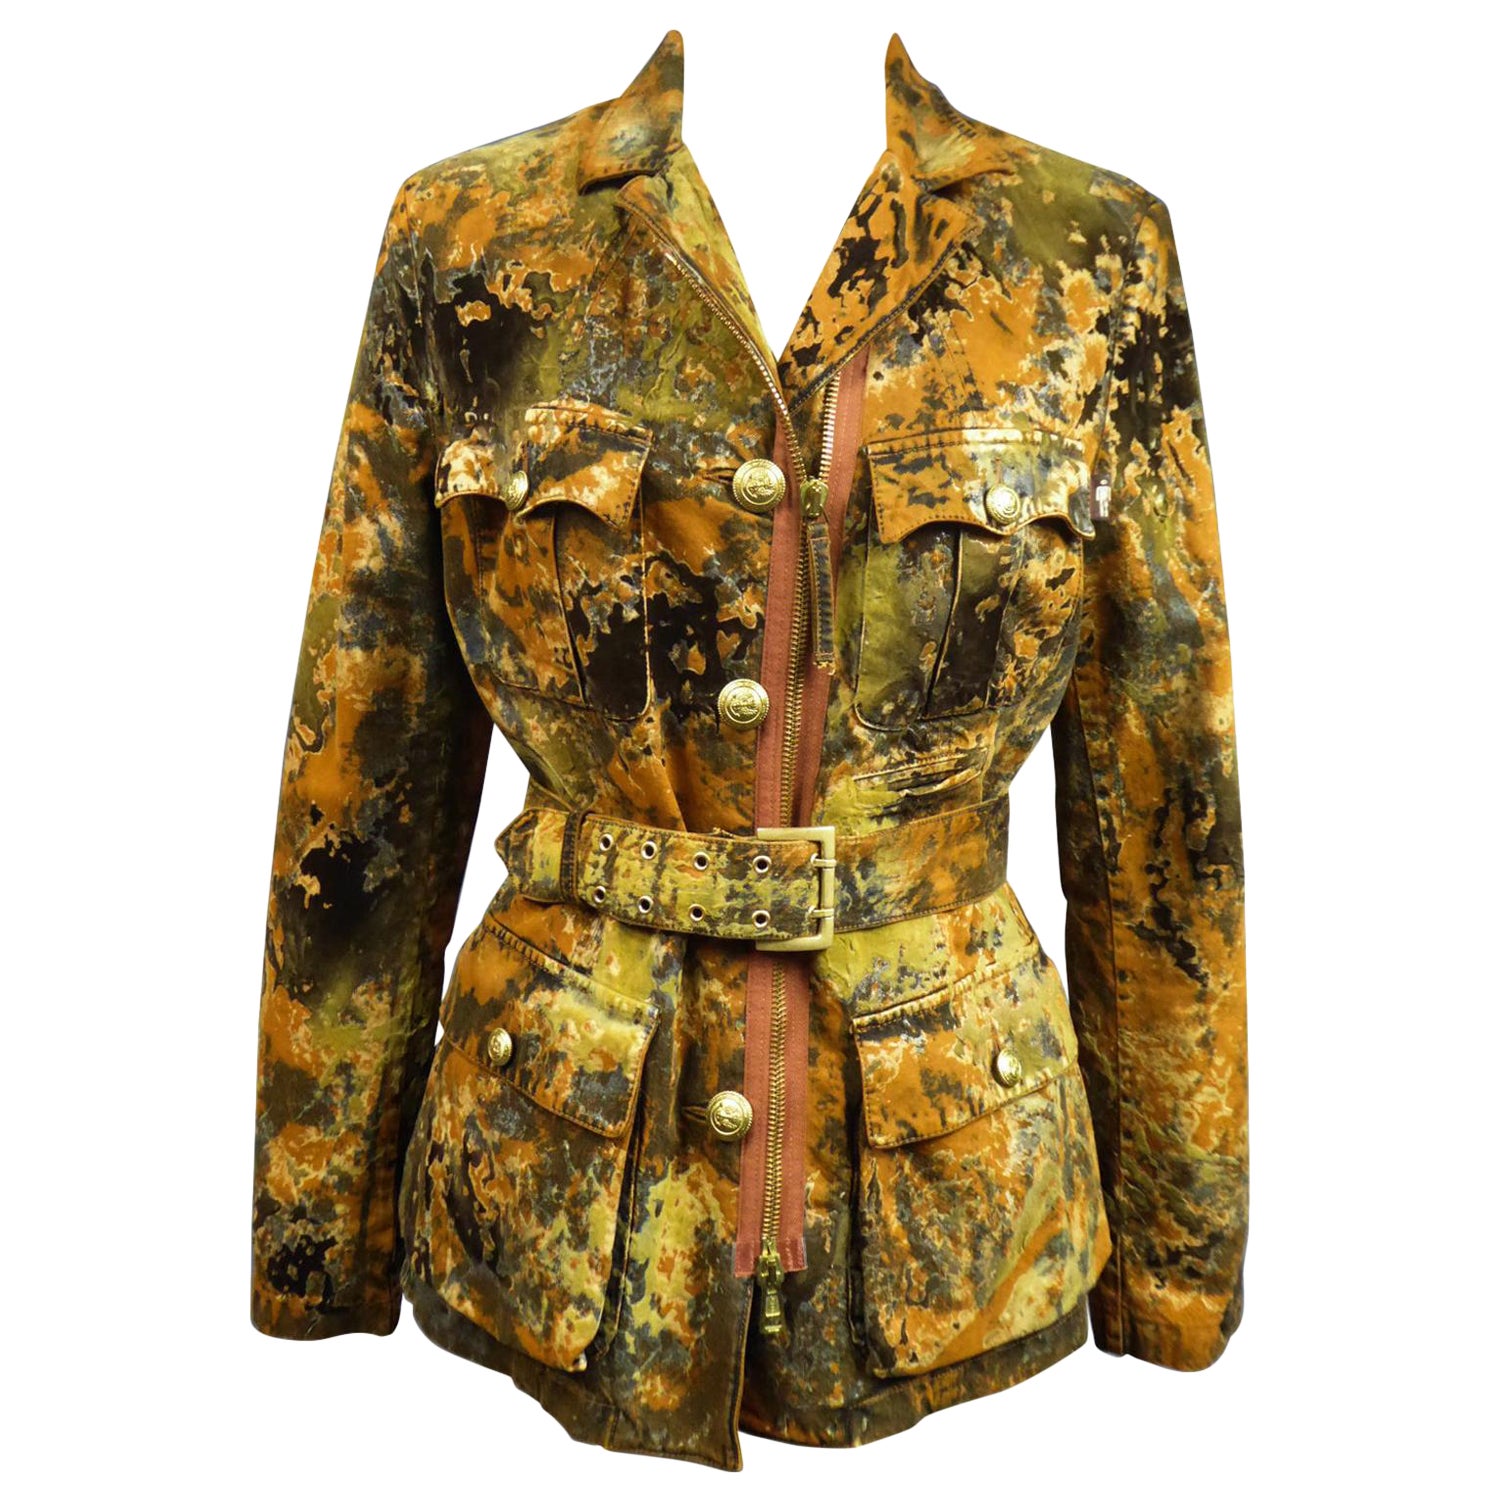 A Jean-Paul Gaultier Jacket of Military Inspiration Circa 2005/2010